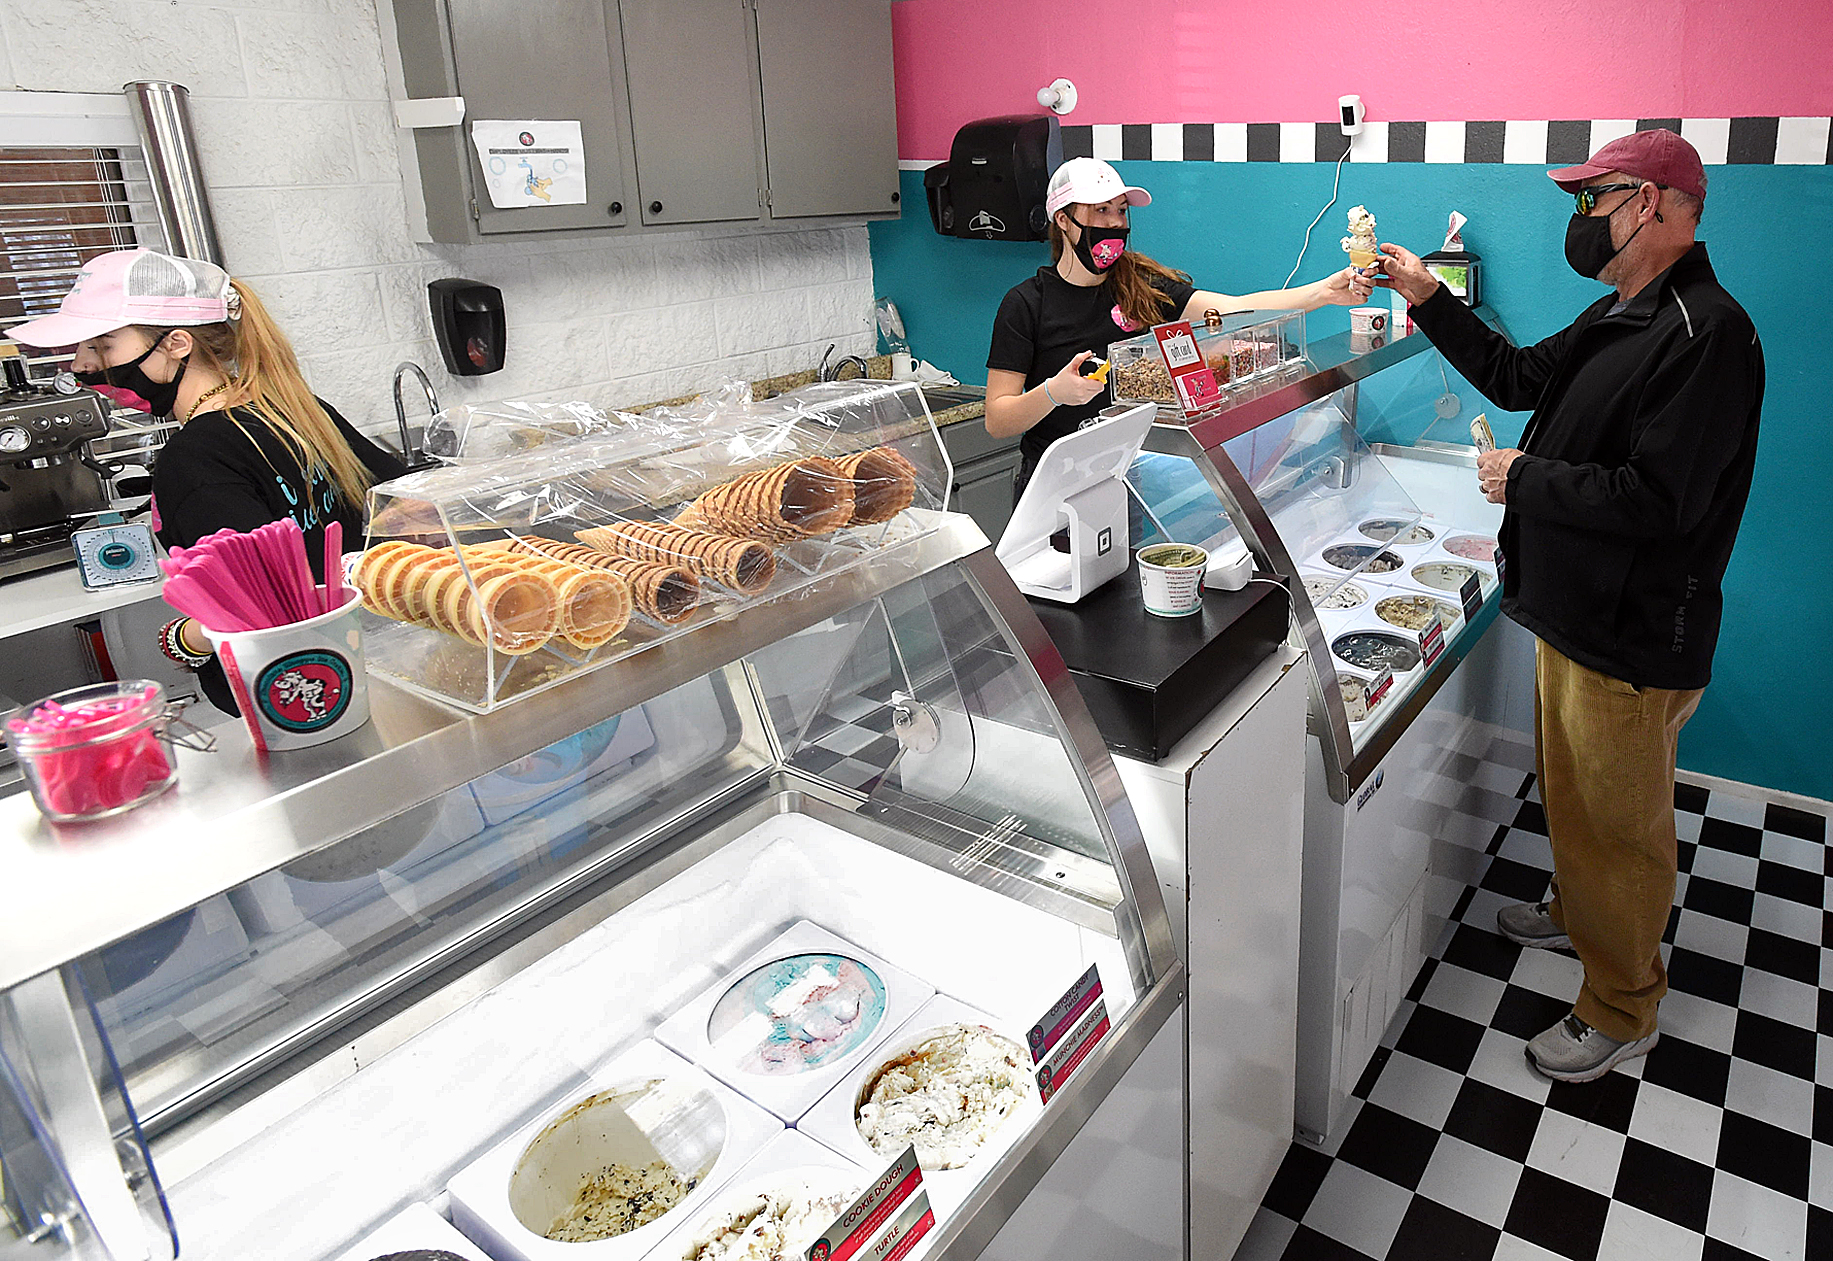 LOVELAND, CO - JANUARY 22, 2021:   Ariana Dodds, center right, hands and ice cream cone to customer Tom Buchanan, right, on Friday, Jan. 22, 2021, at her new ice cream shop, Ice Scream Ice Cream at 4221 W. Eisenhower Blvd. in the Former Esh's Grocery store building in west Loveland. Employee Cameo Blakeney, far left, prepares the rest of the order.    (Jenny Sparks/Loveland Reporter-Herald)